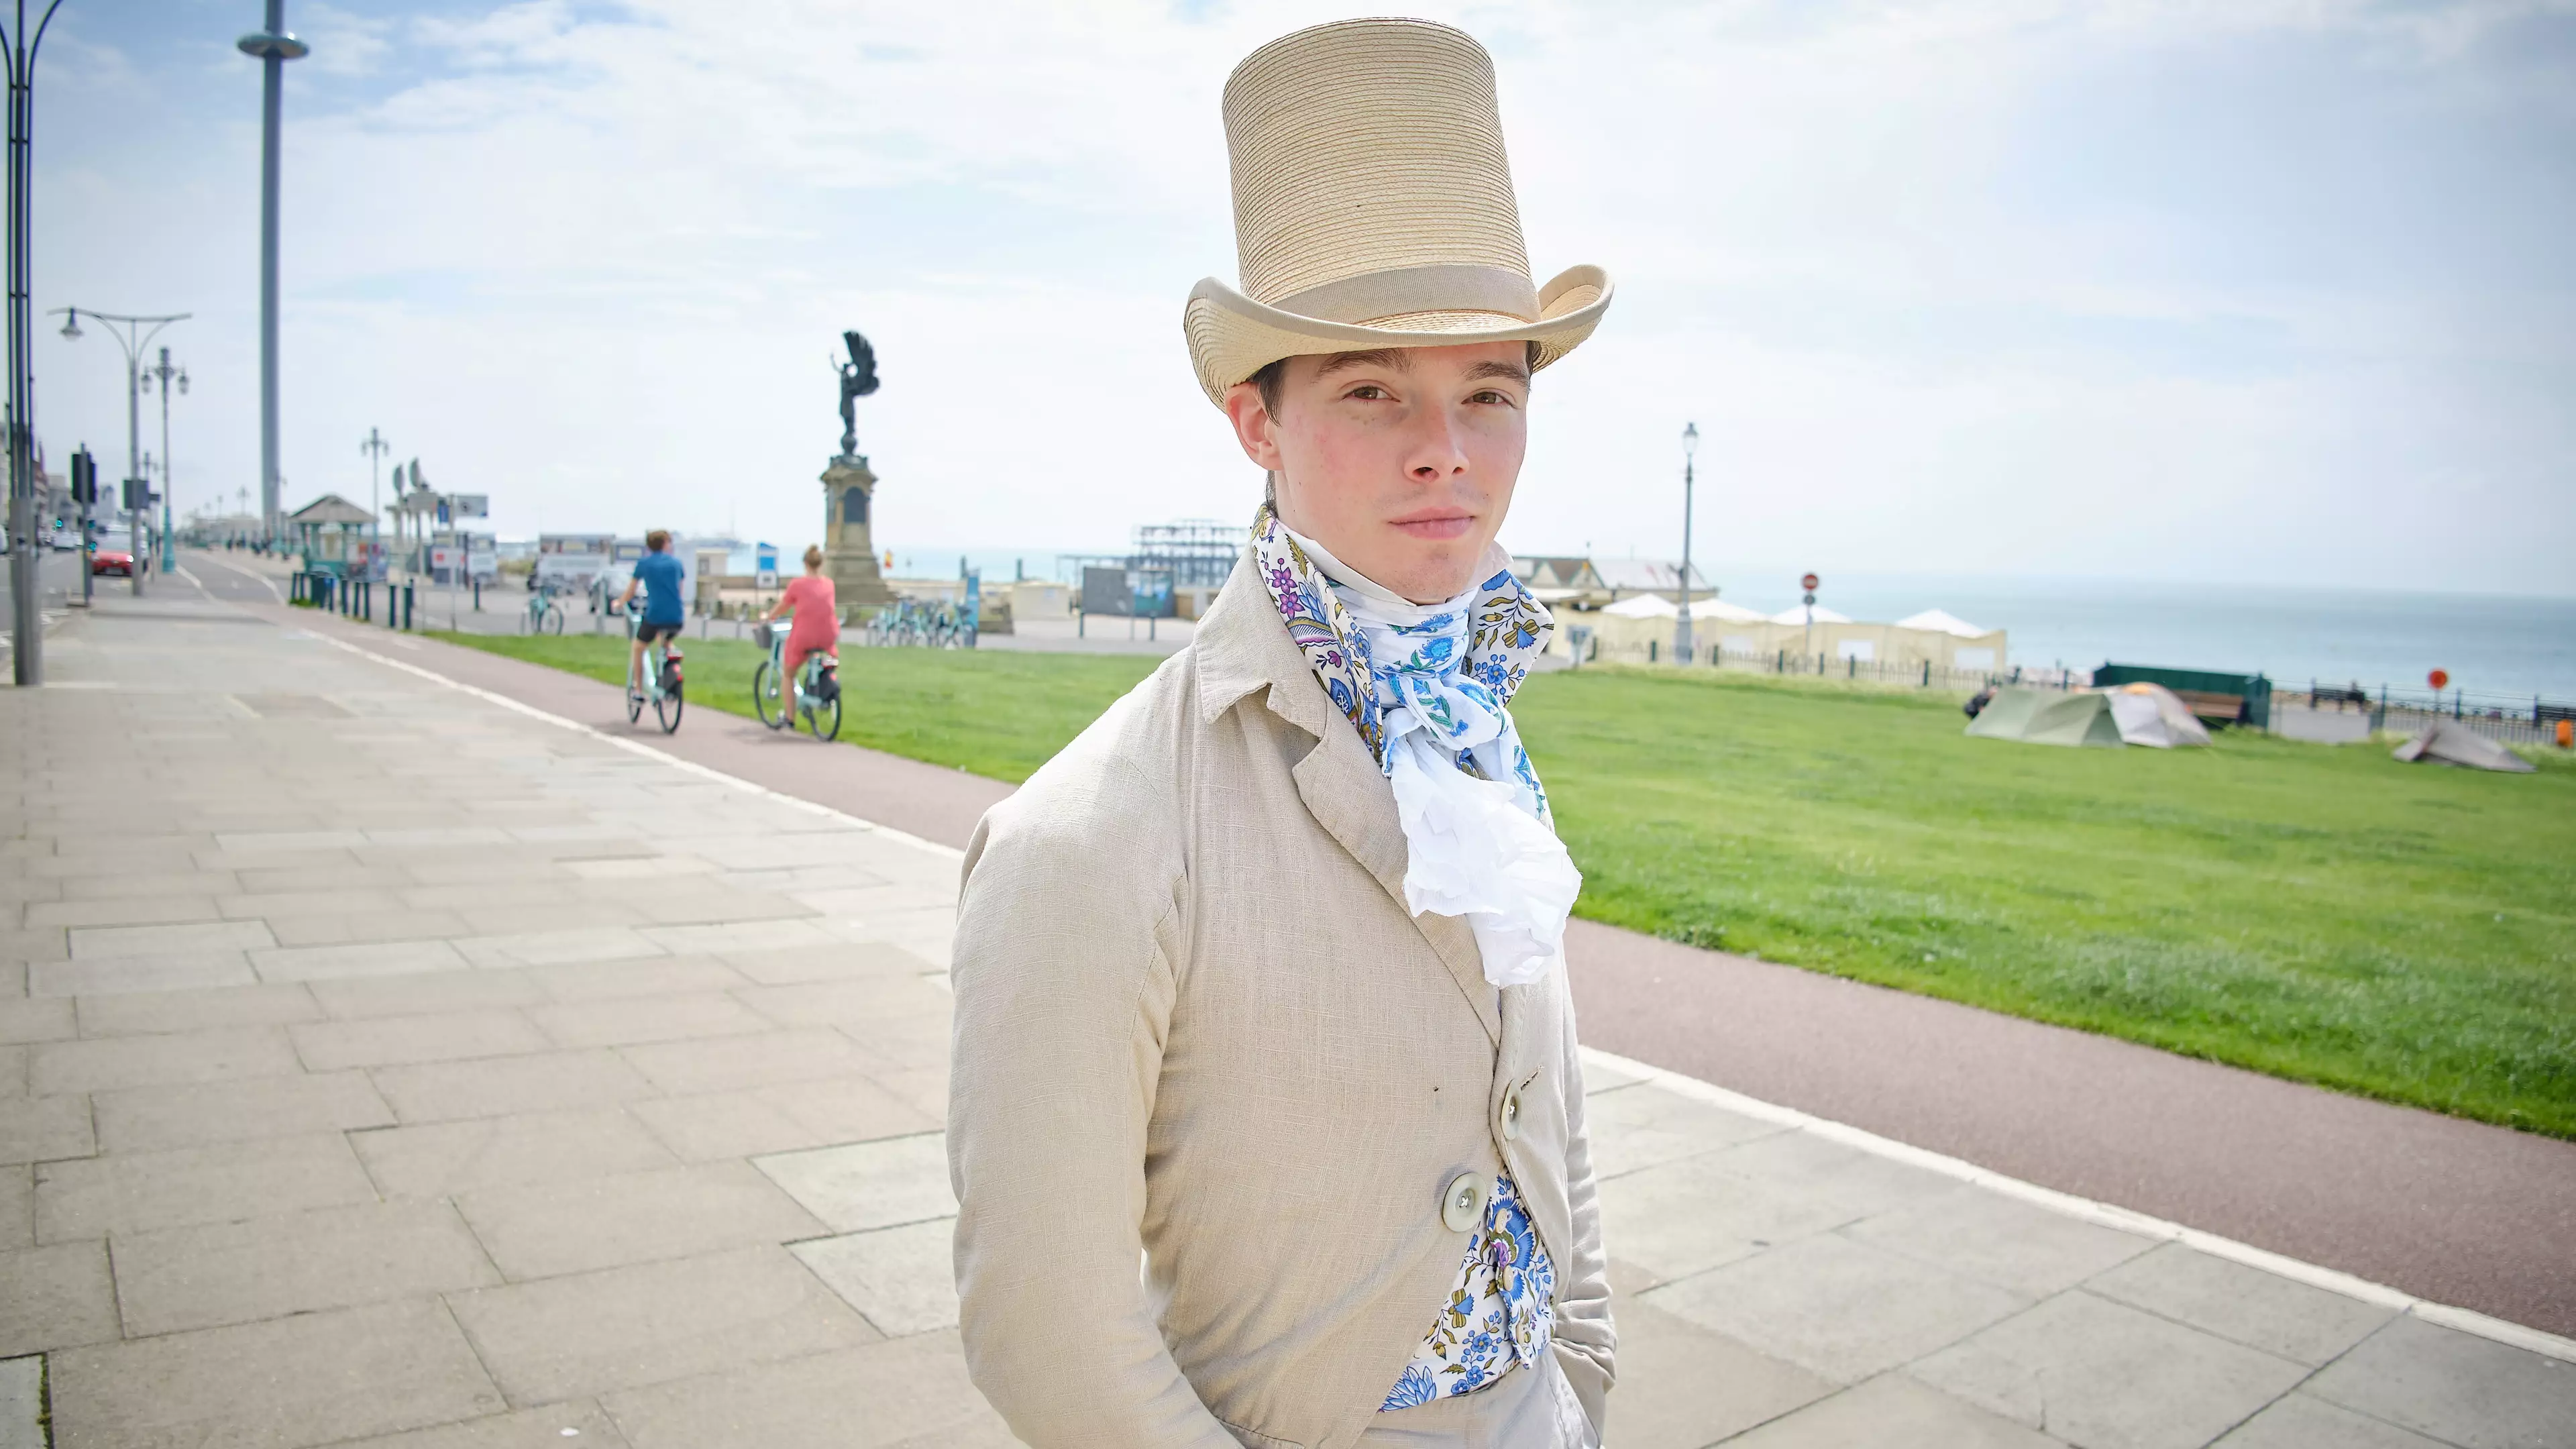 Man Identifies As Being From The 1820s And Only Dresses That Way